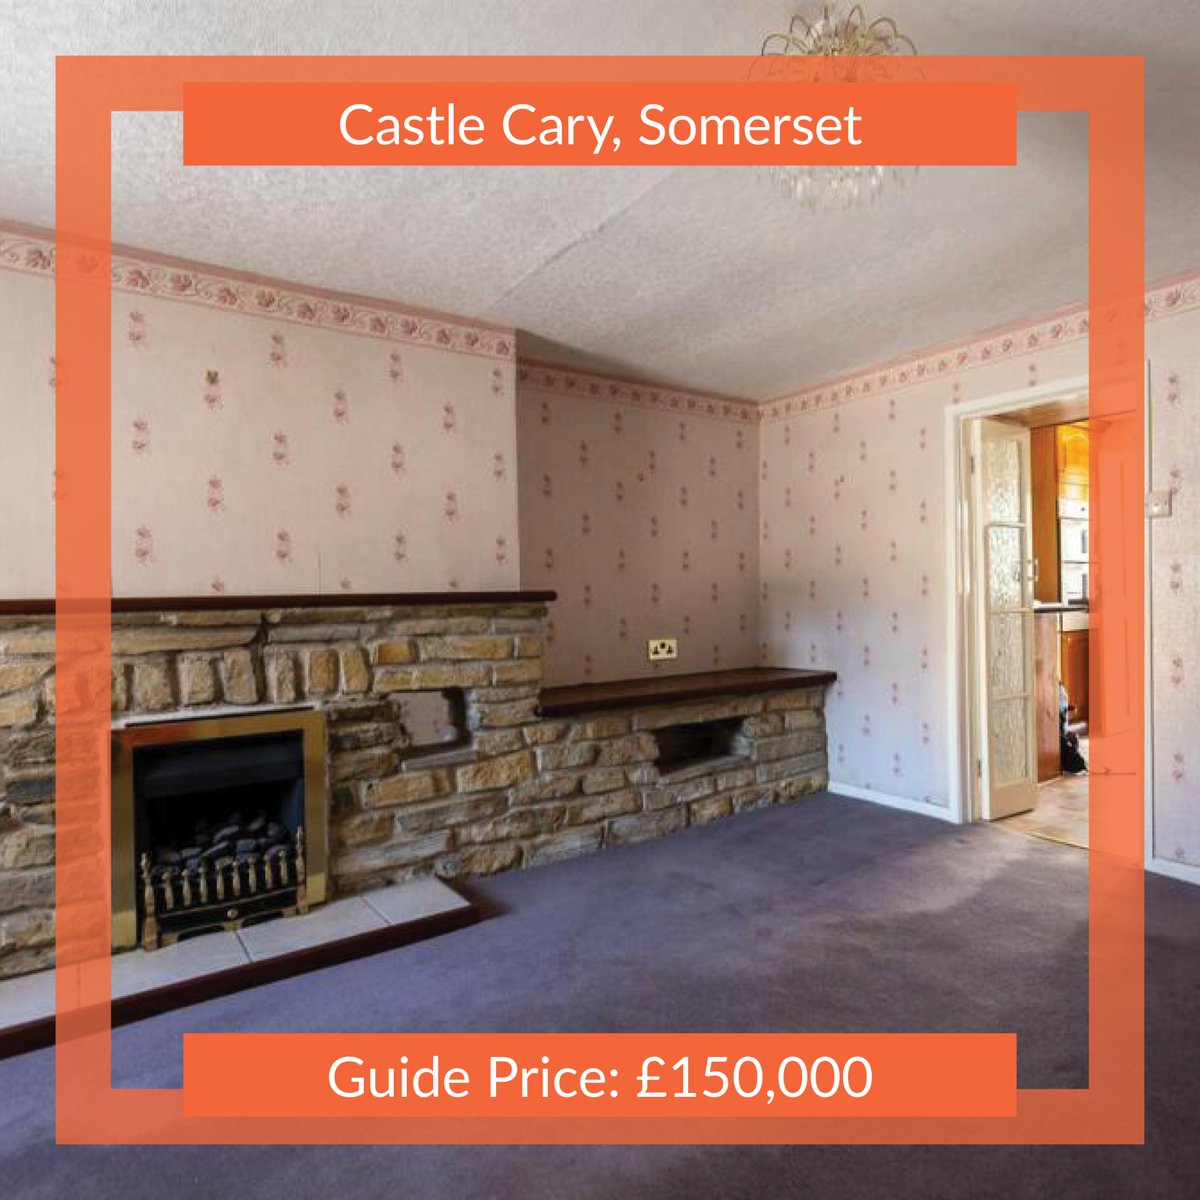 NEW LISTING in #CastleCary #Somerset
Guide: £150,000
Auction: 31/07/23
Website: whoobid.co.uk/accueil/auctio…

#whoobid #propertyauction #houseauction #auction #property #buytolet #propertyinvestor #housingmarket #estateagent #quicksale #propertydeals #pricegrowth #mortgage #investment